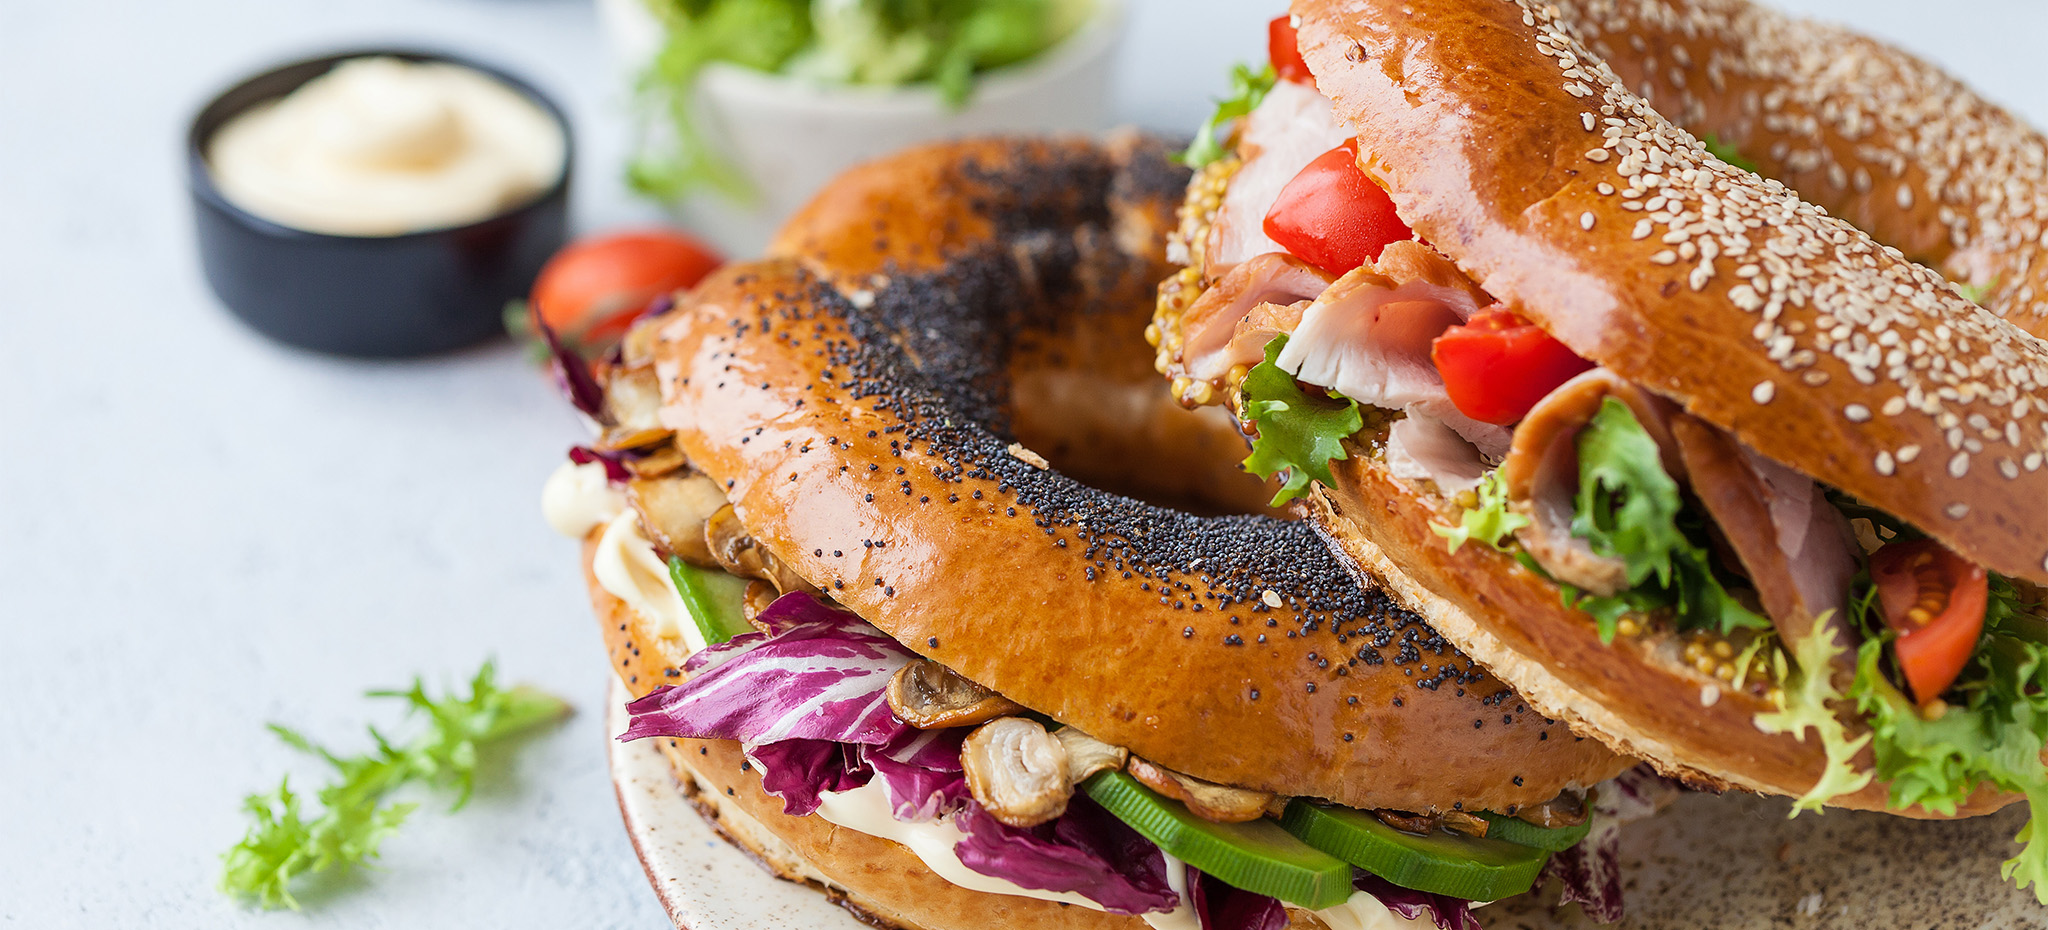 Our bagel sandwiches are prepared with the freshest and highest quality ingredients we can find.